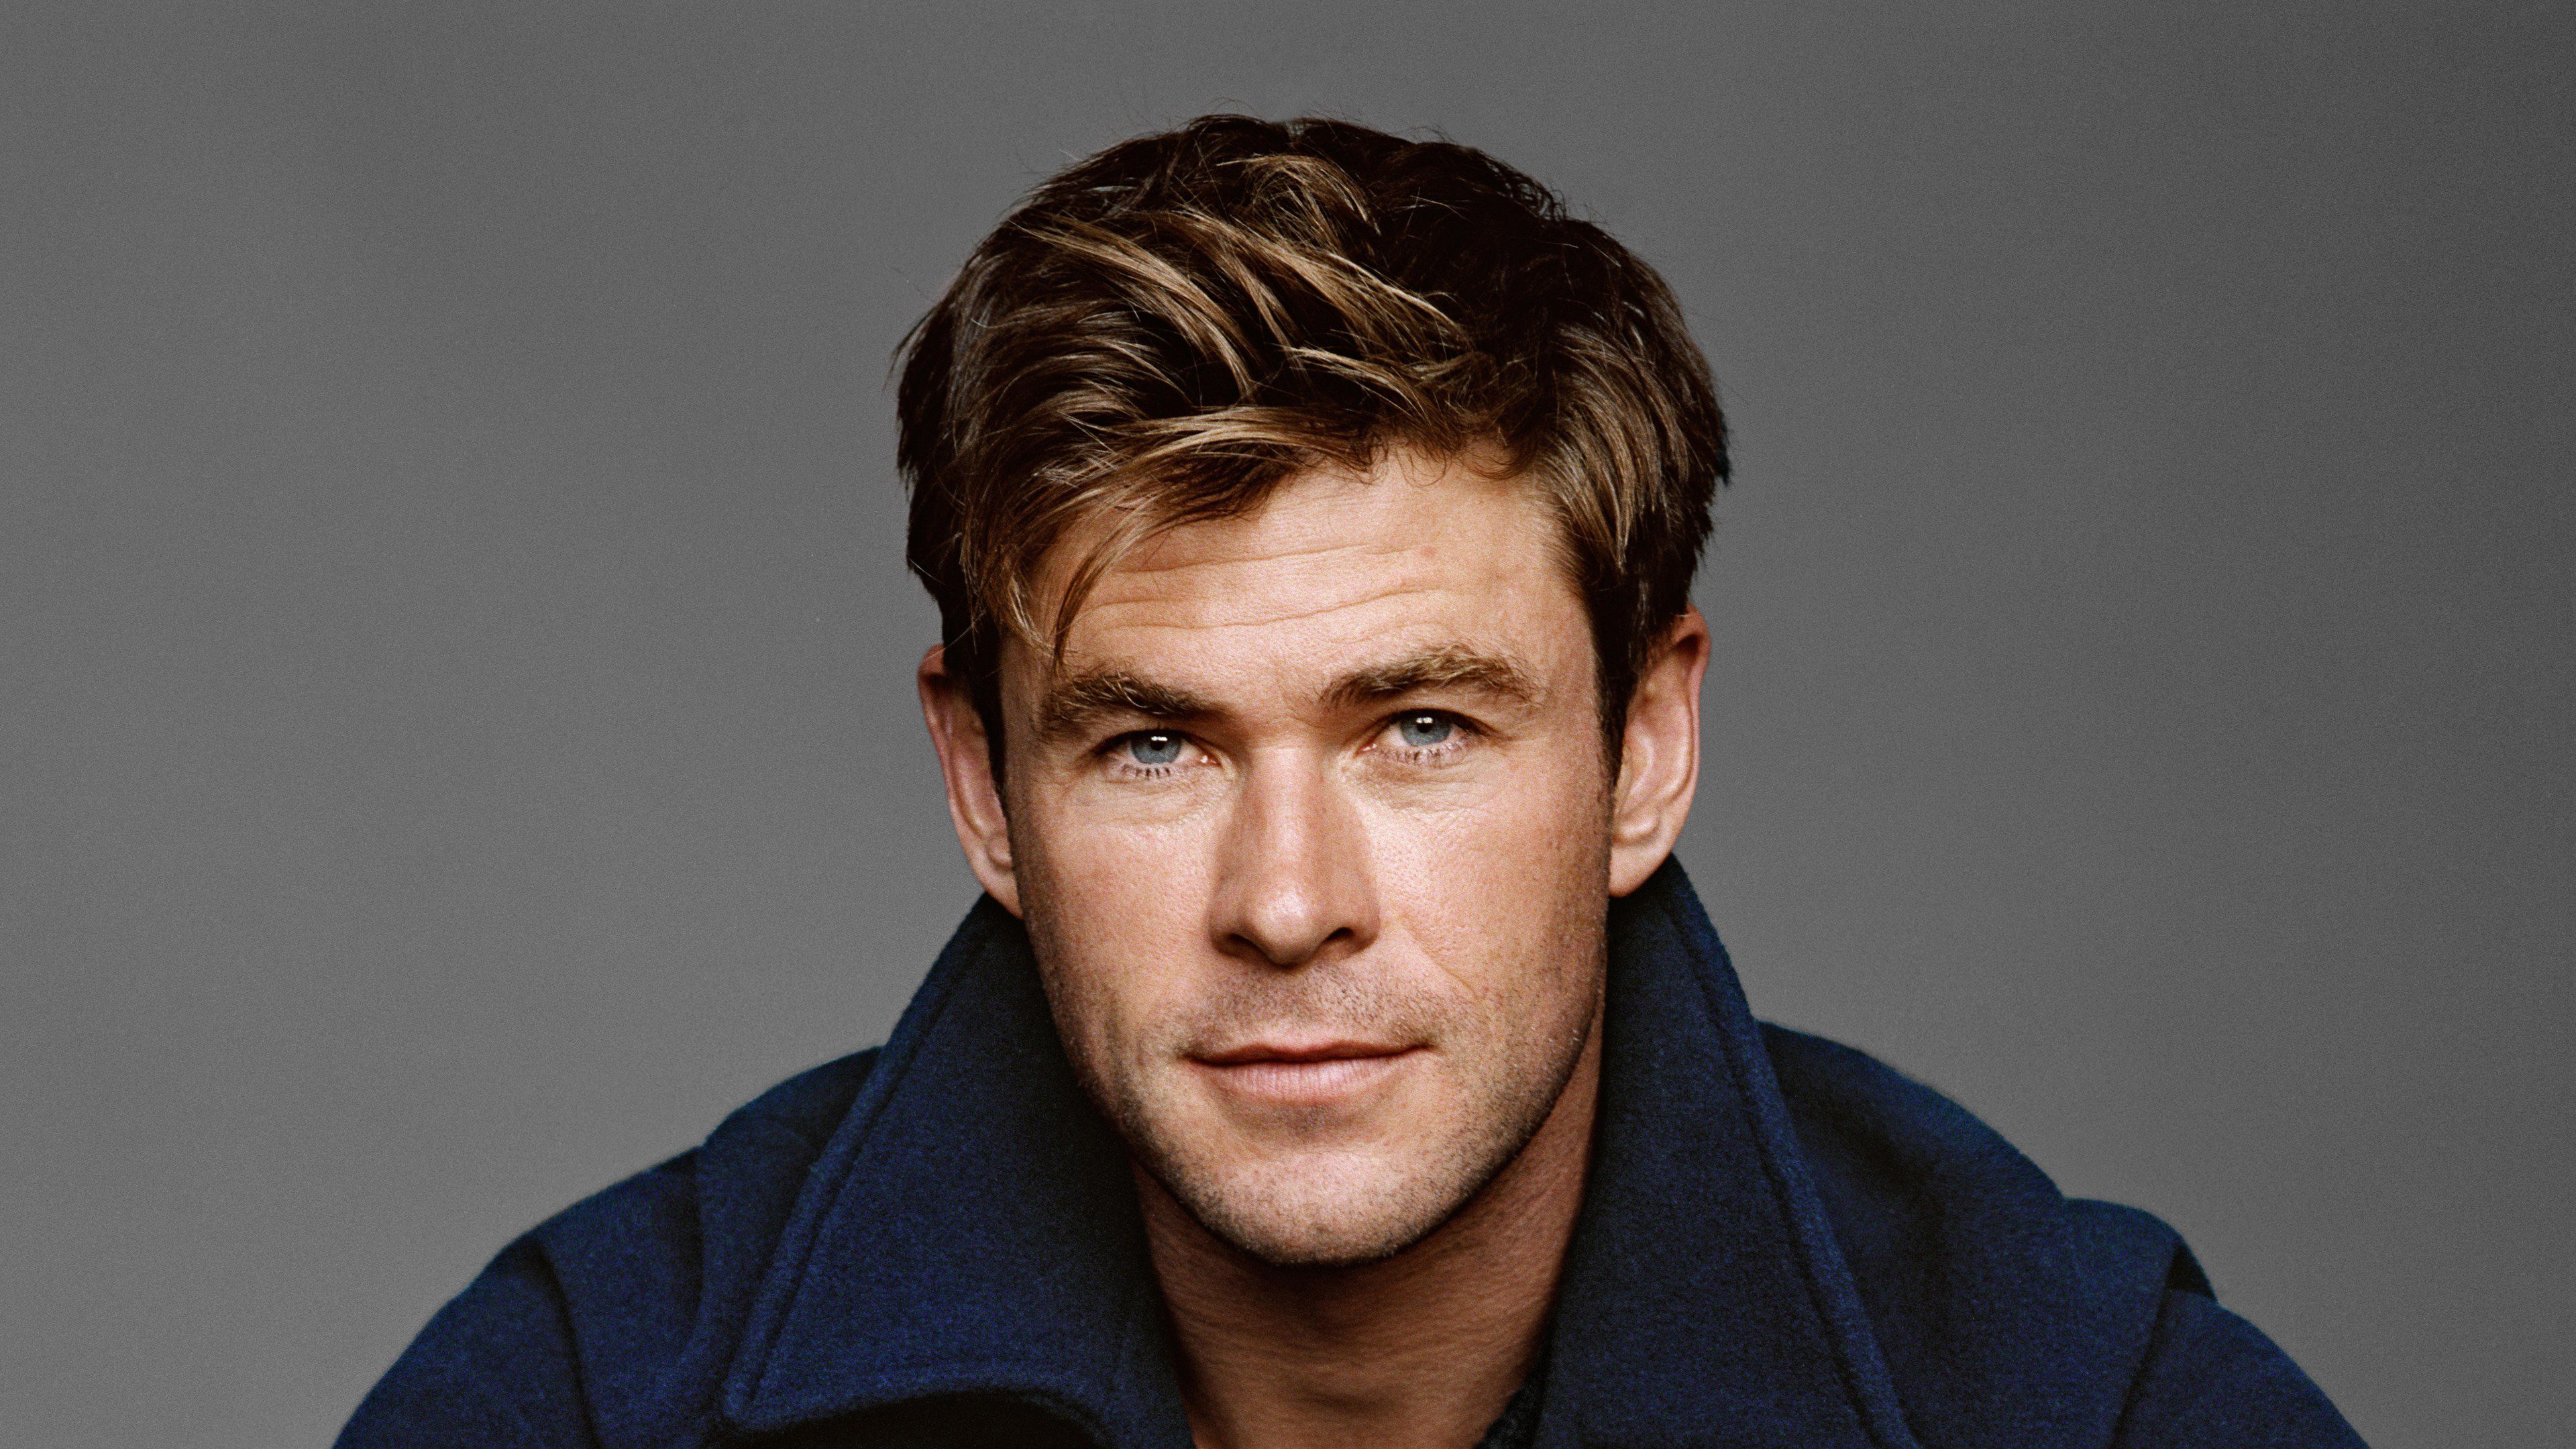 Chris Hemsworth GQ 2018 iPad Air HD 4k Wallpaper, Image, Background, Photo and Picture